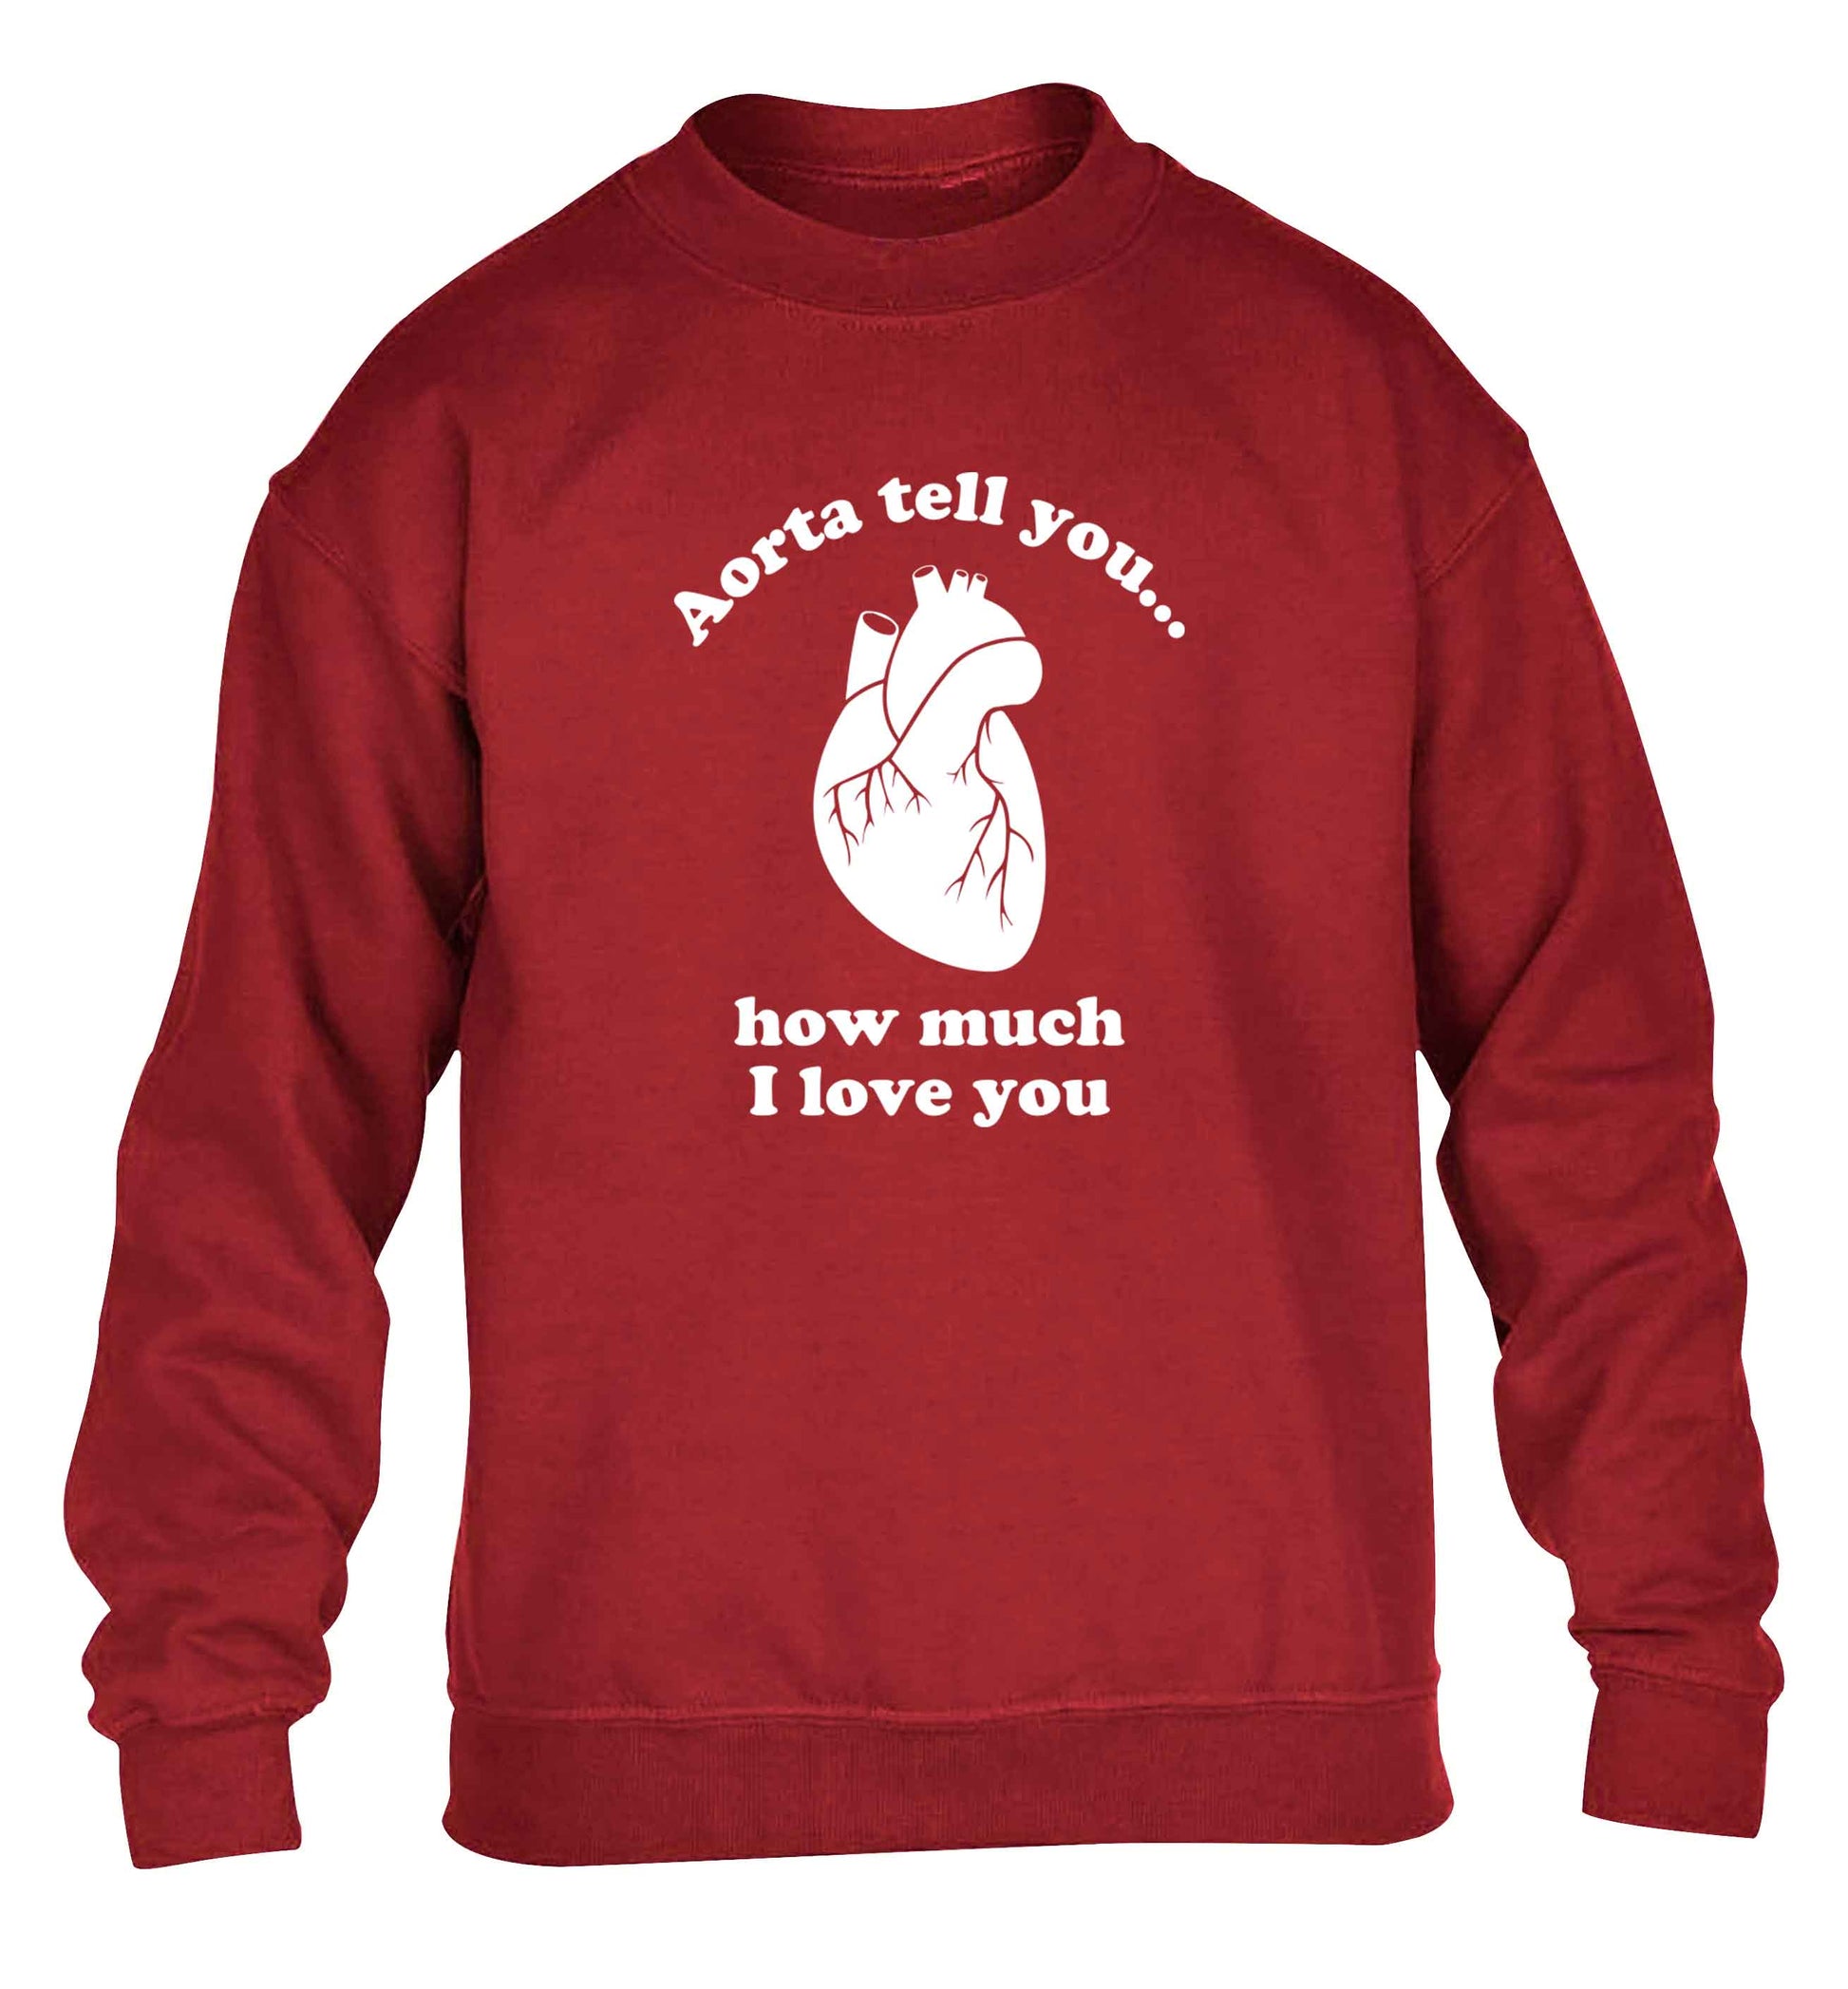 Aorta tell you how much I love you children's grey sweater 12-13 Years